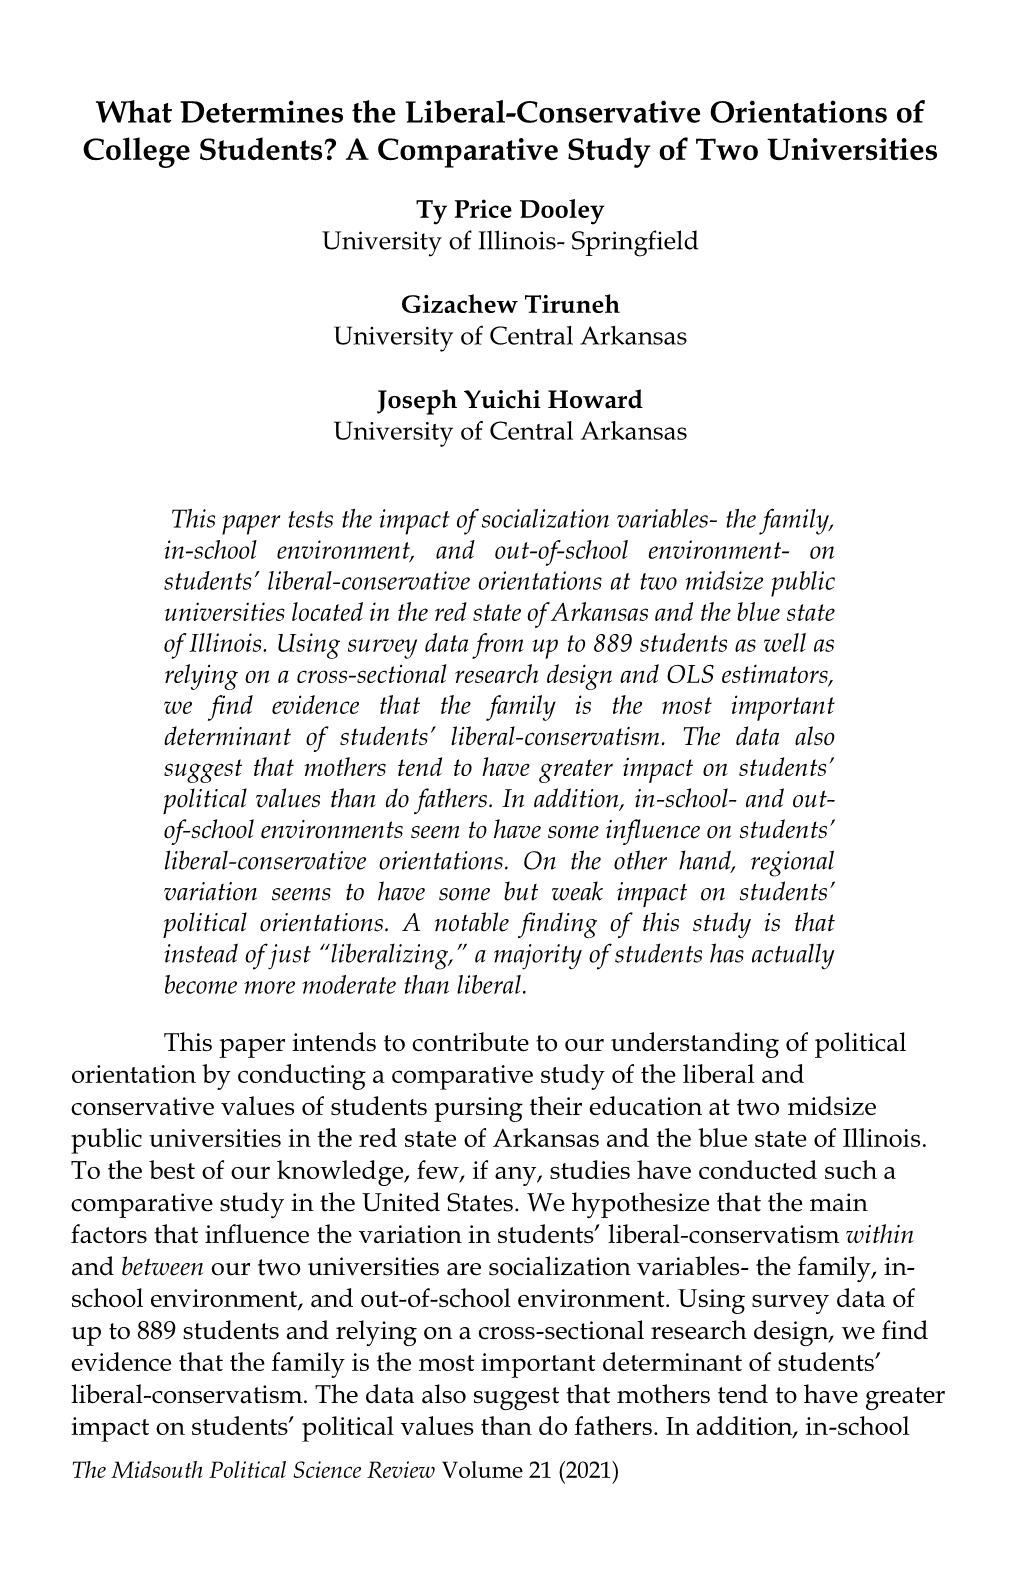 What Determines the Liberal-Conservative Orientations of College Students? a Comparative Study of Two Universities